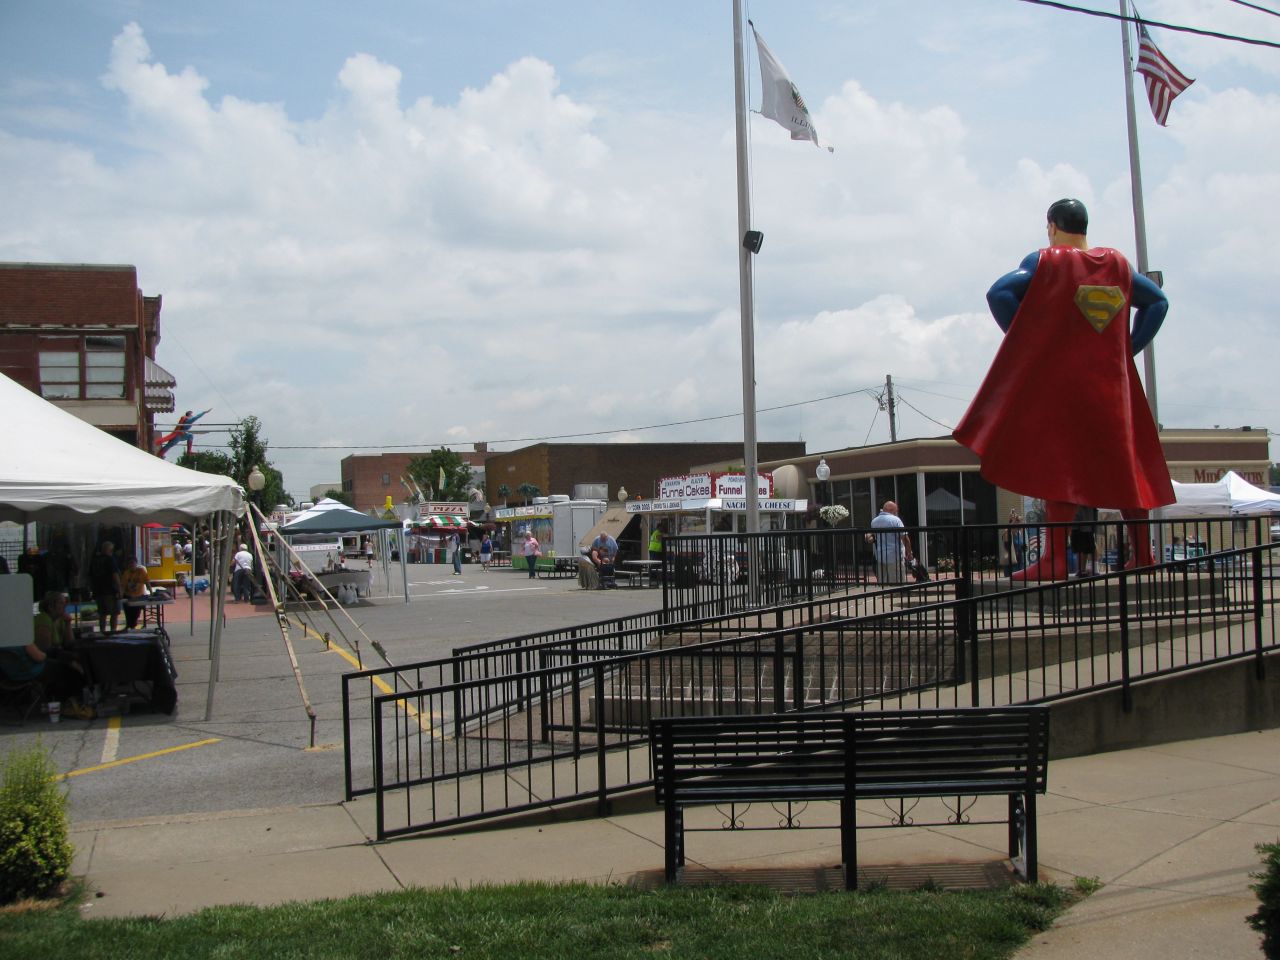 If you're a fan of the Man of Steel, why not make a visit to Metropolis? Thousands of fans descend on the town every year for the Superman Celebration and iReporter Scott Braun hopes to make it an annual trip for as many years as he can. "Every year I go, I meet more people who all feel the same affection for Superman that I have." <br /><a href="http://ireport.cnn.com/docs/DOC-458013" target="_blank">Check out more photos from his trip to Metropolis on his iReport</a>.